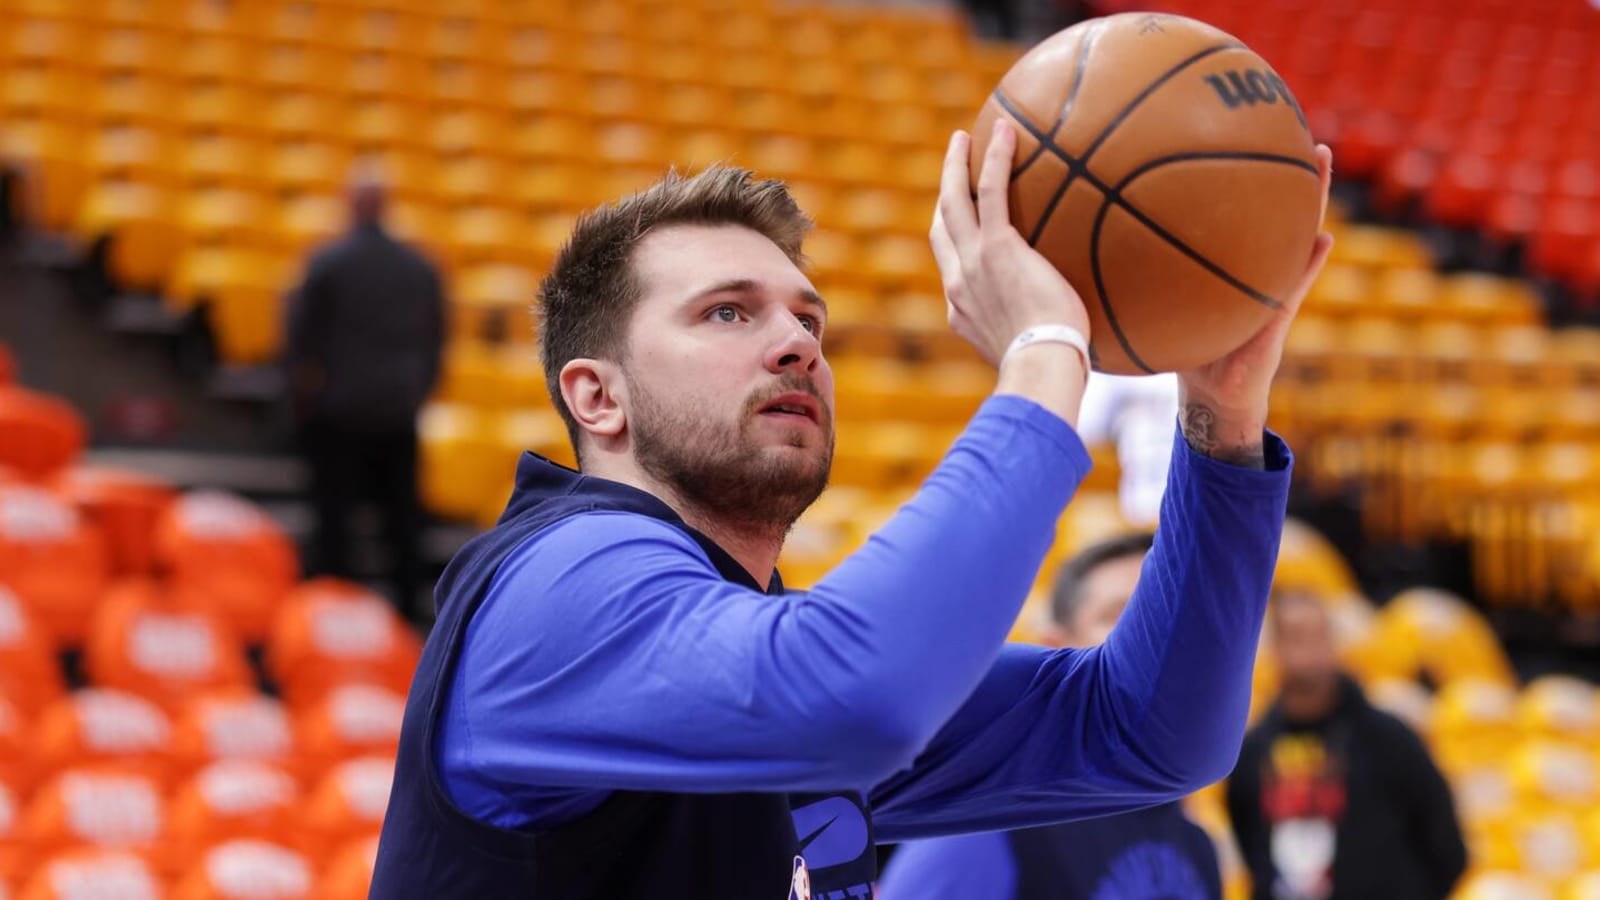 Luka Doncic upgraded to probable for Game 4